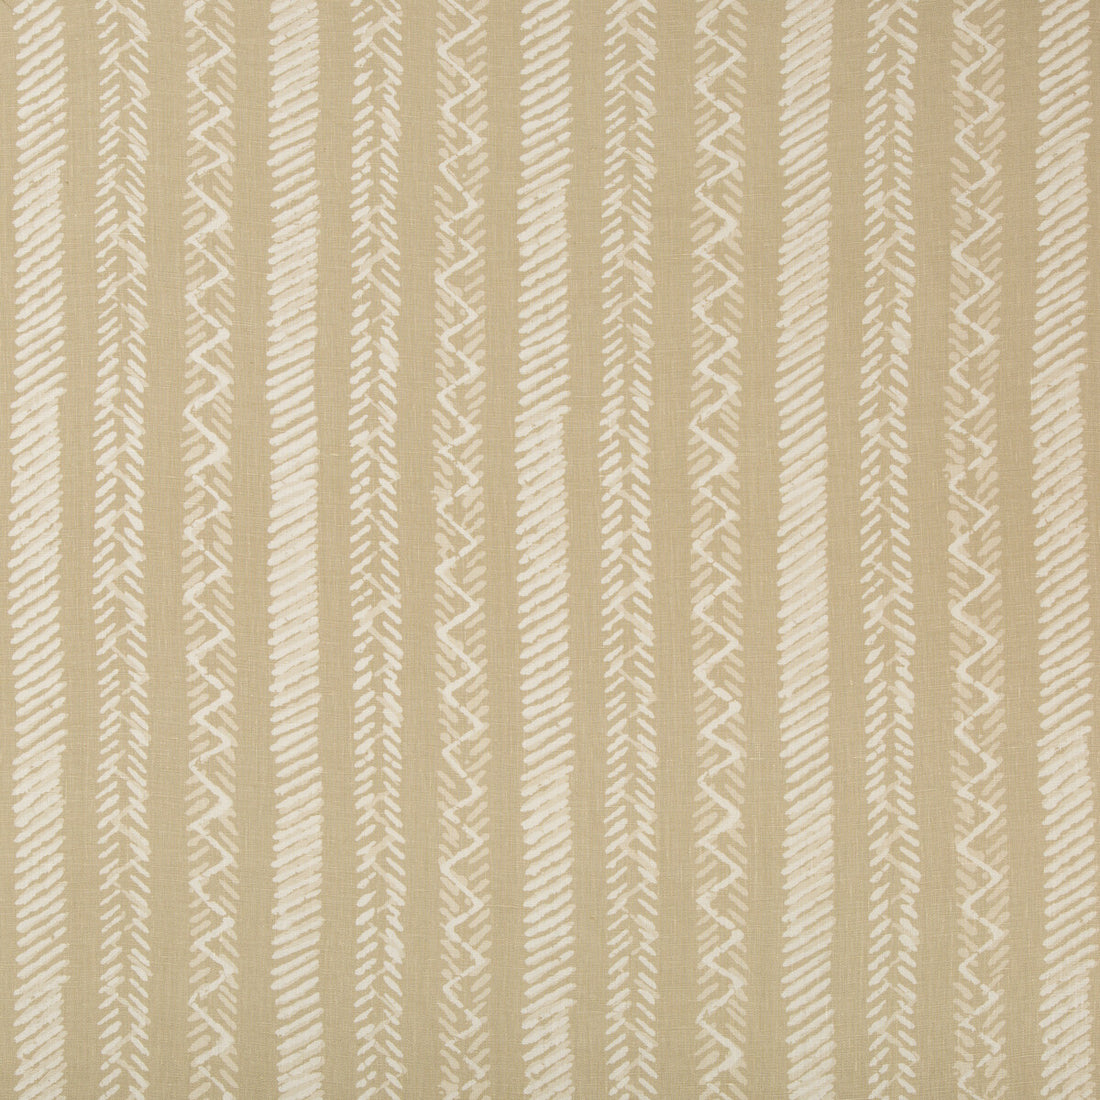 Tintlines fabric in wheat color - pattern TINTLINES.16.0 - by Kravet Design in the Barclay Butera Sagamore collection